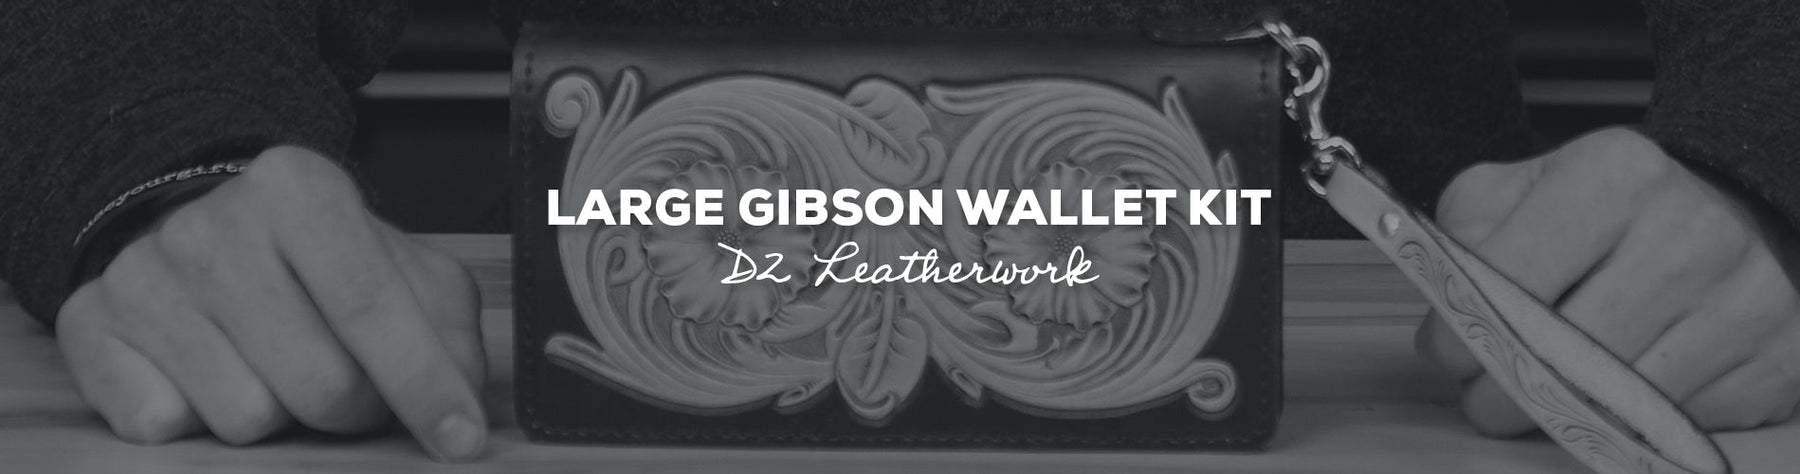 Gift Idea: Gibson Wallet Kit with D2 Leatherwork